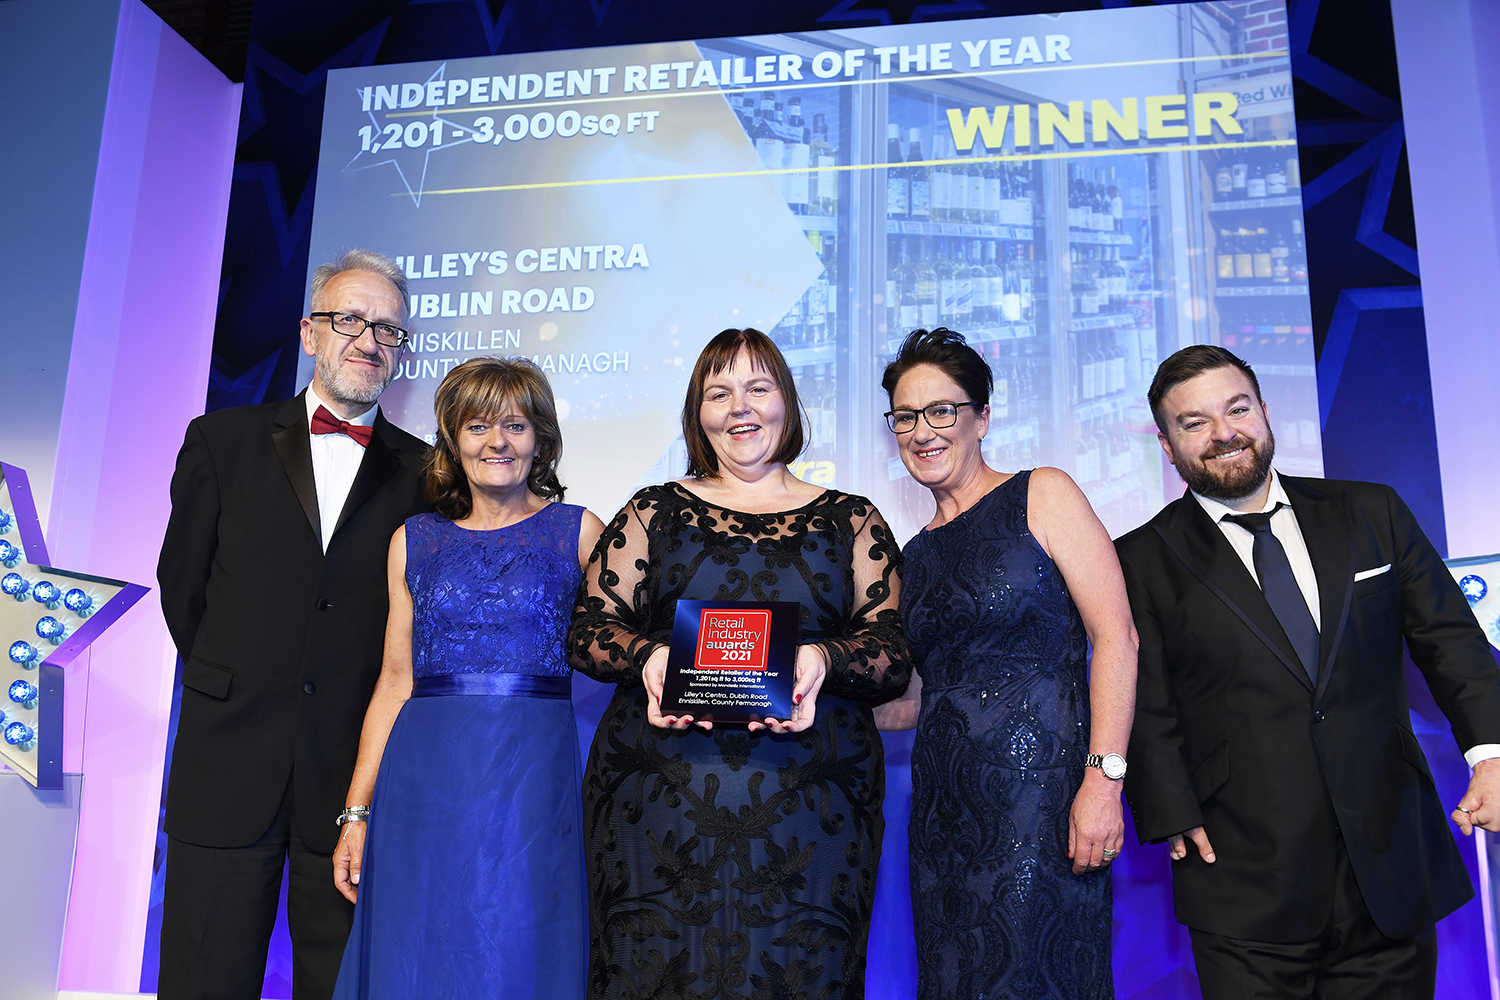 Fermanagh store secures win at prestigious retail awards